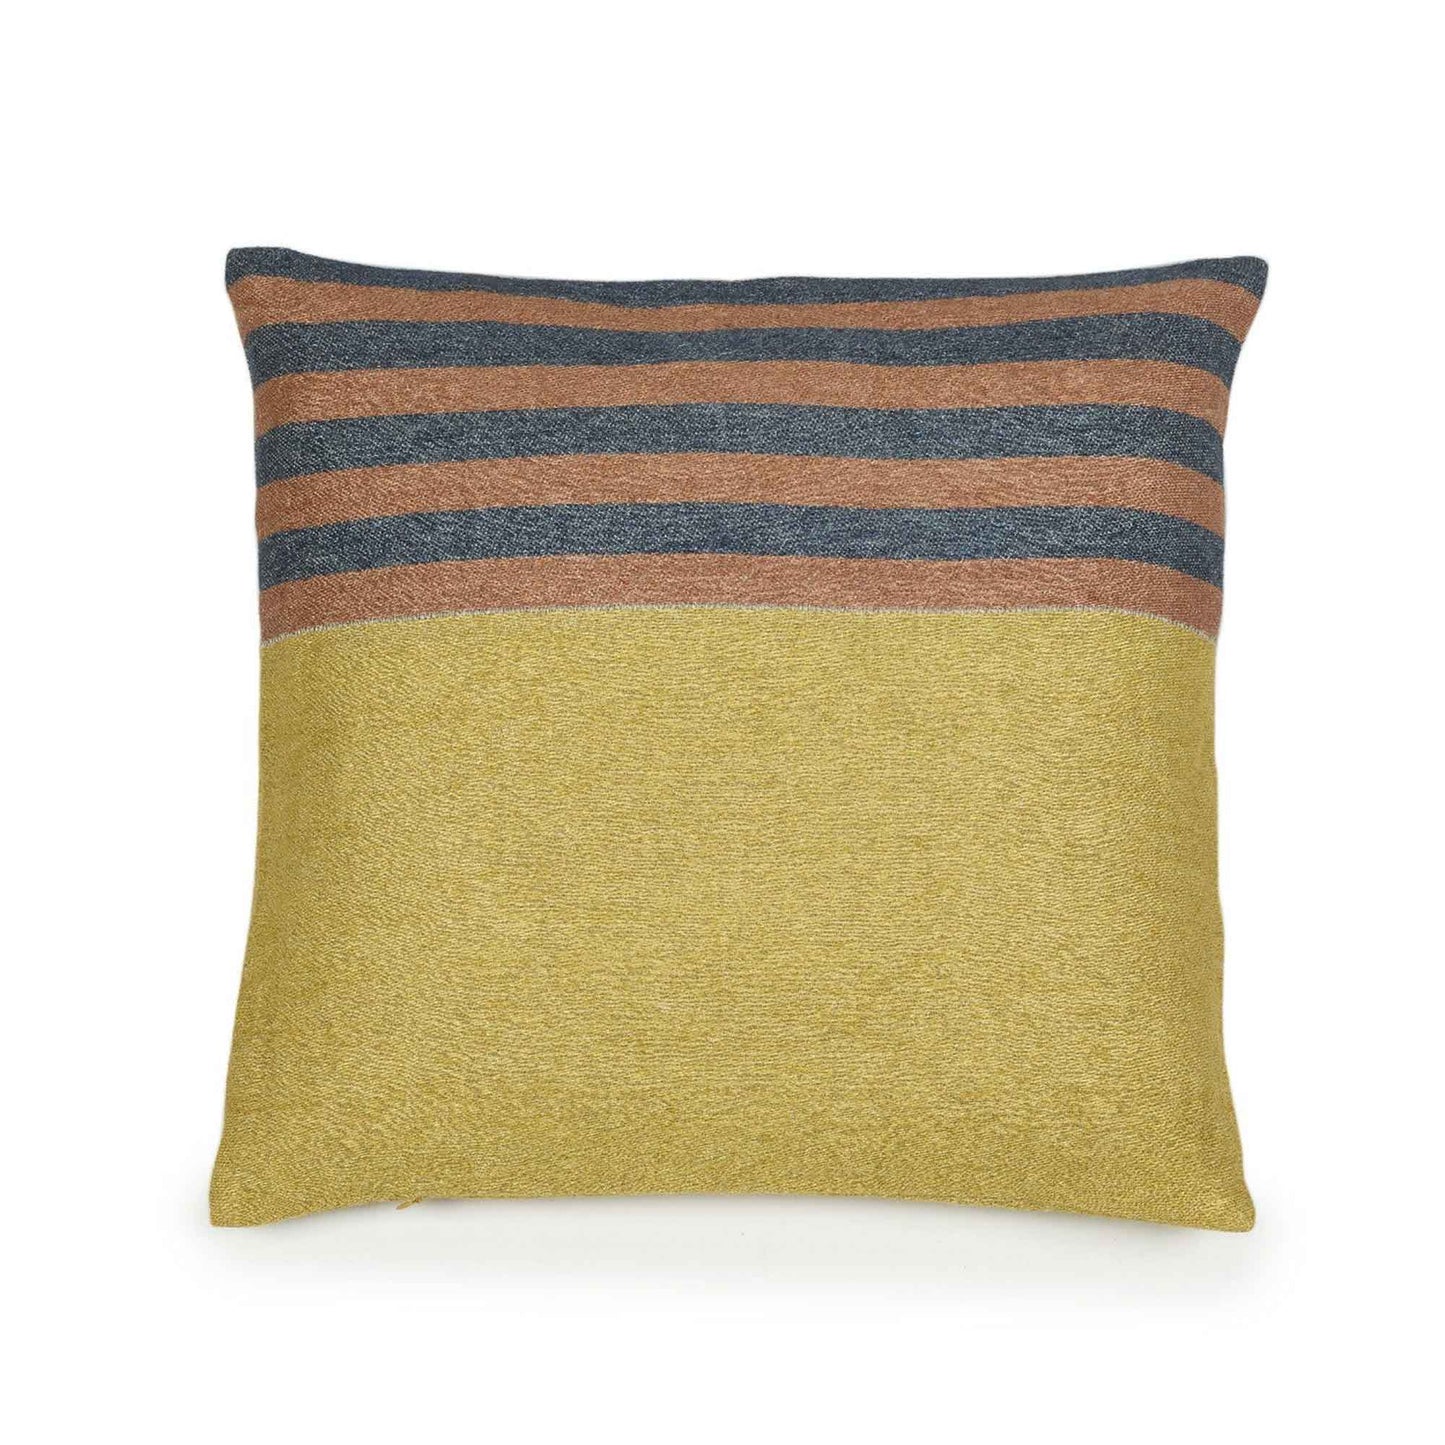 Belgian linen throw pillow cover flat lay product shot in color Red Earth by Libeco for South Hous.